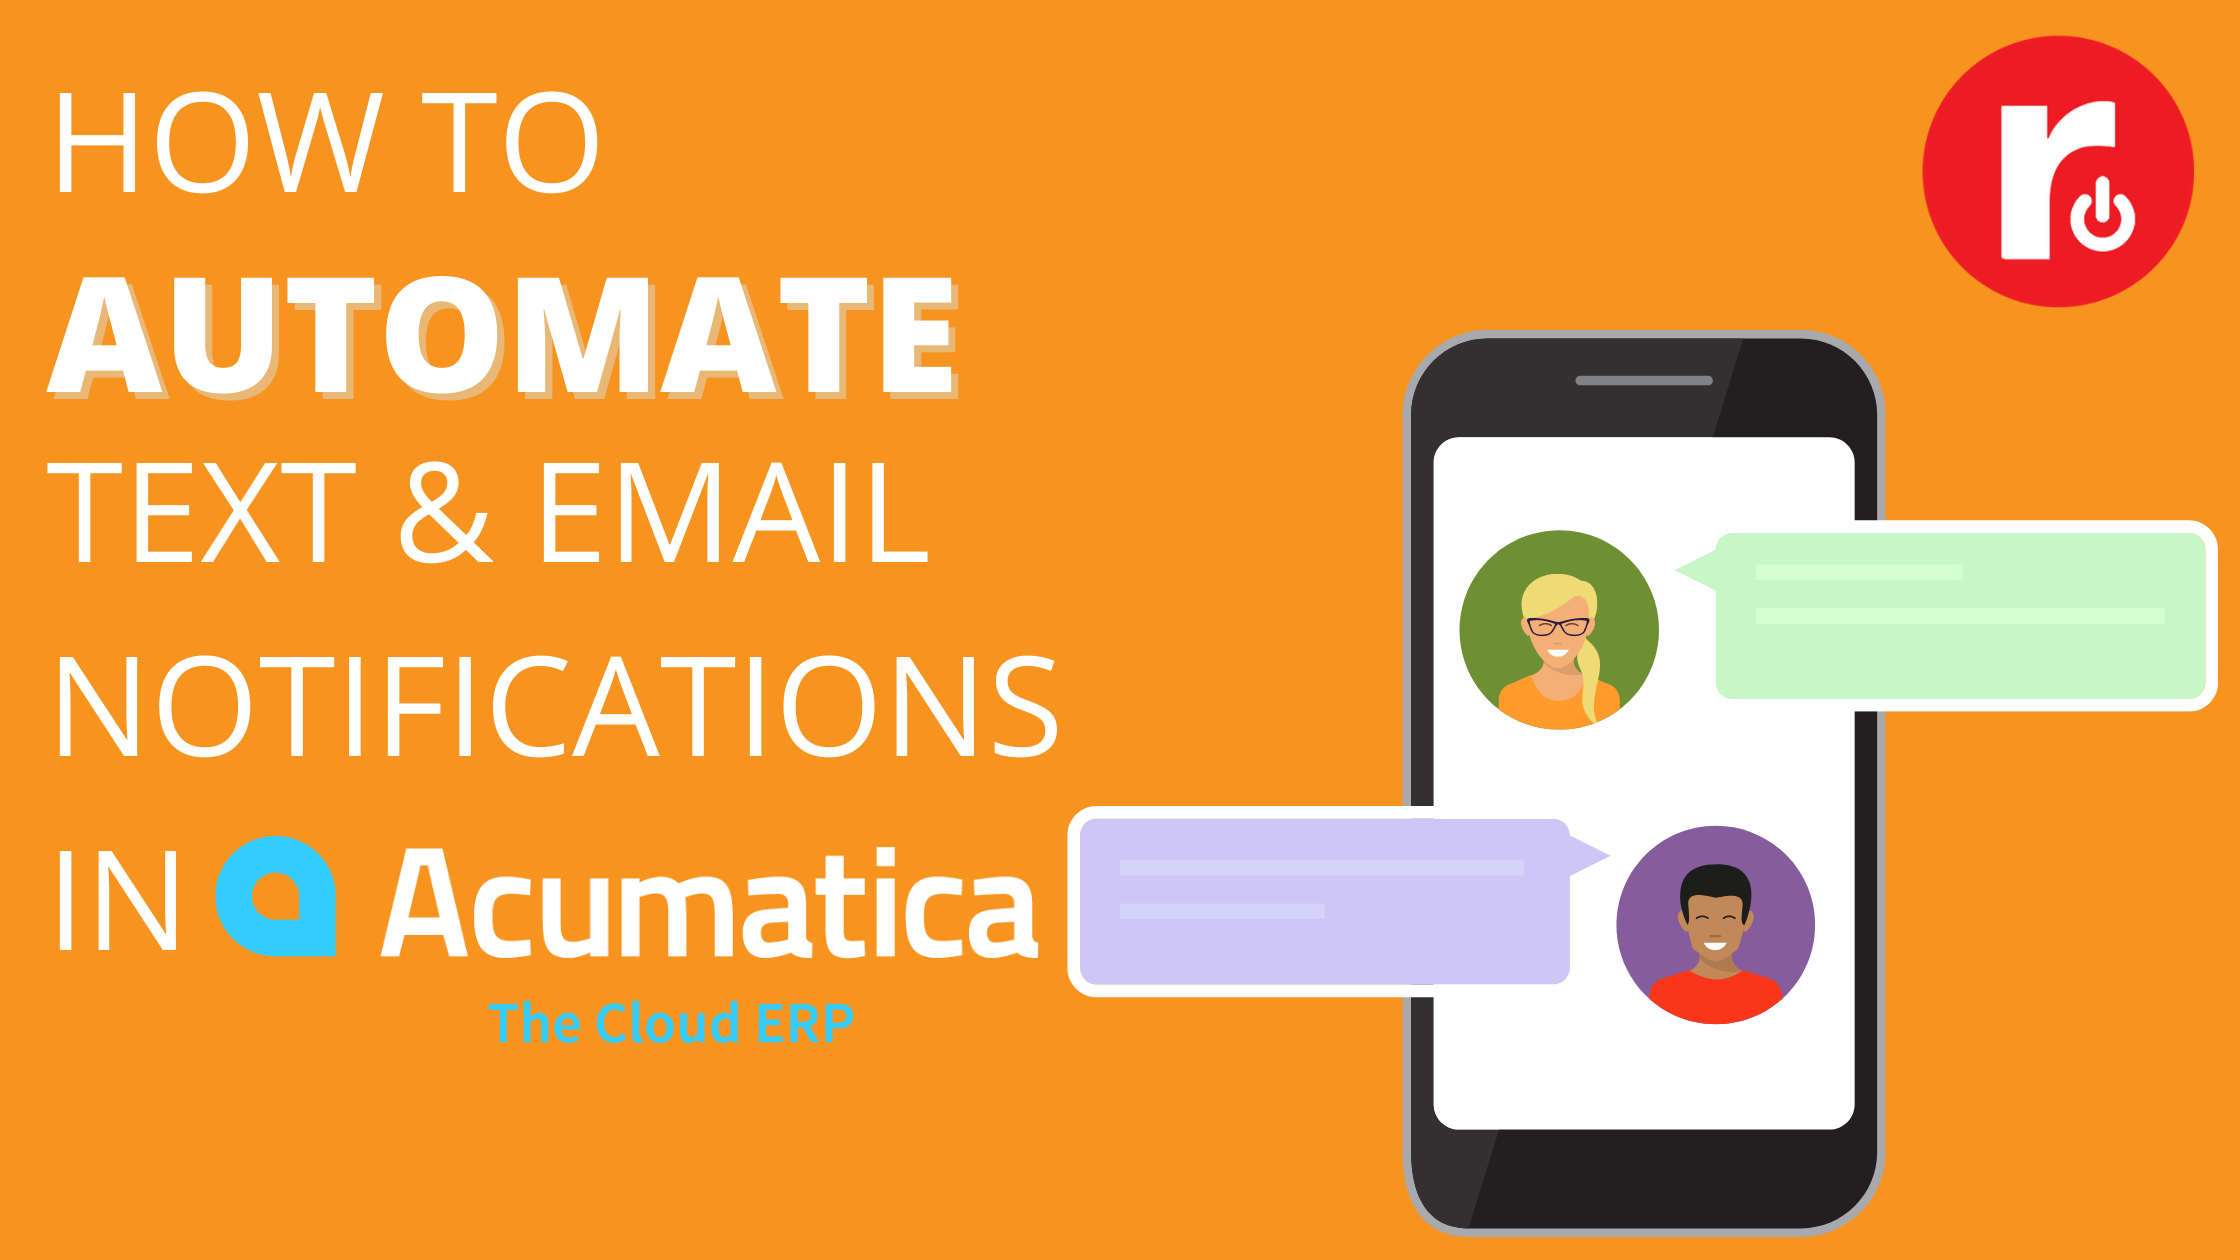 How to Automate Text and Email Notifications in Acumatica